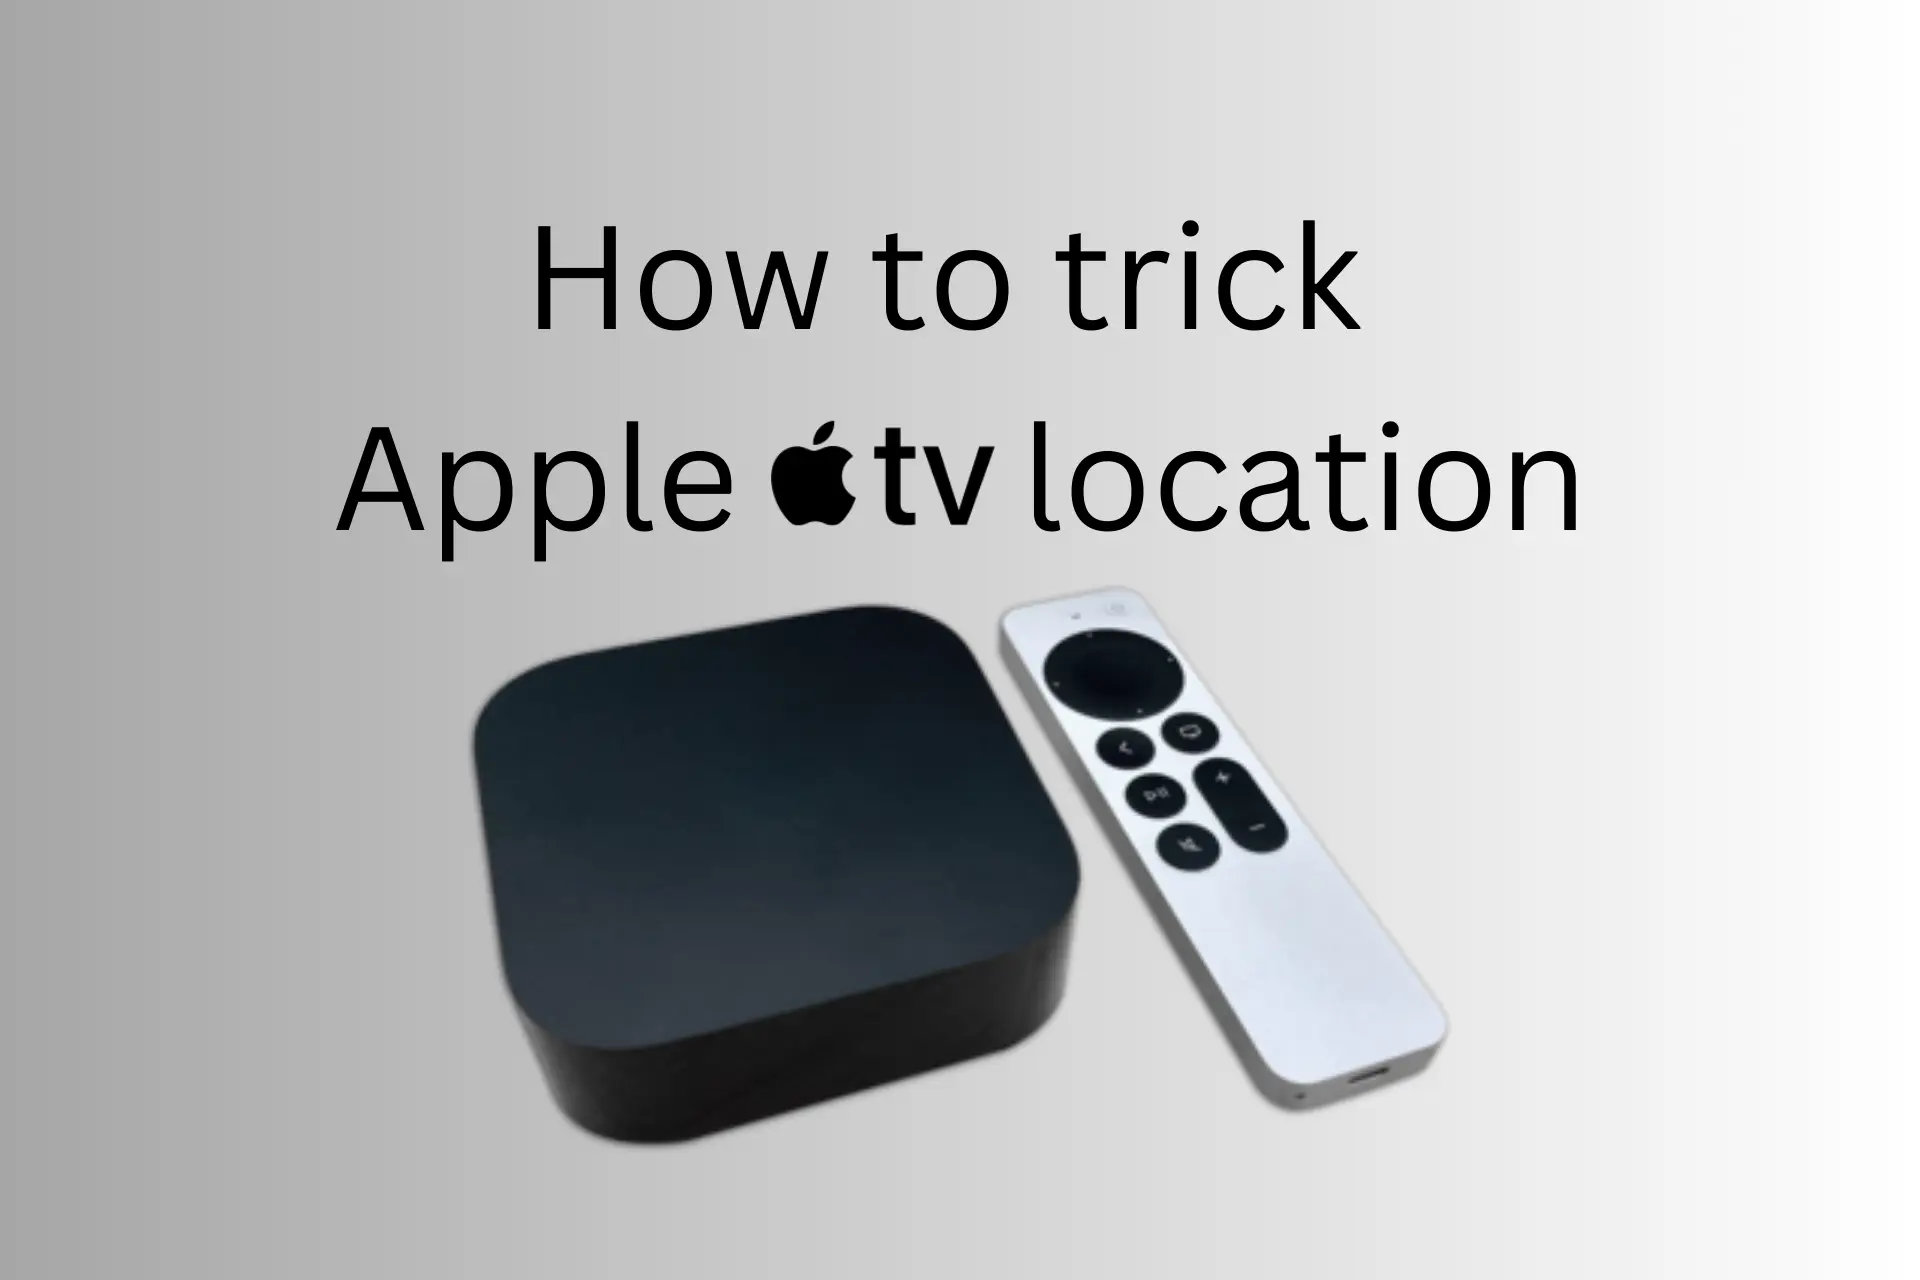 How to trick Apple tv location